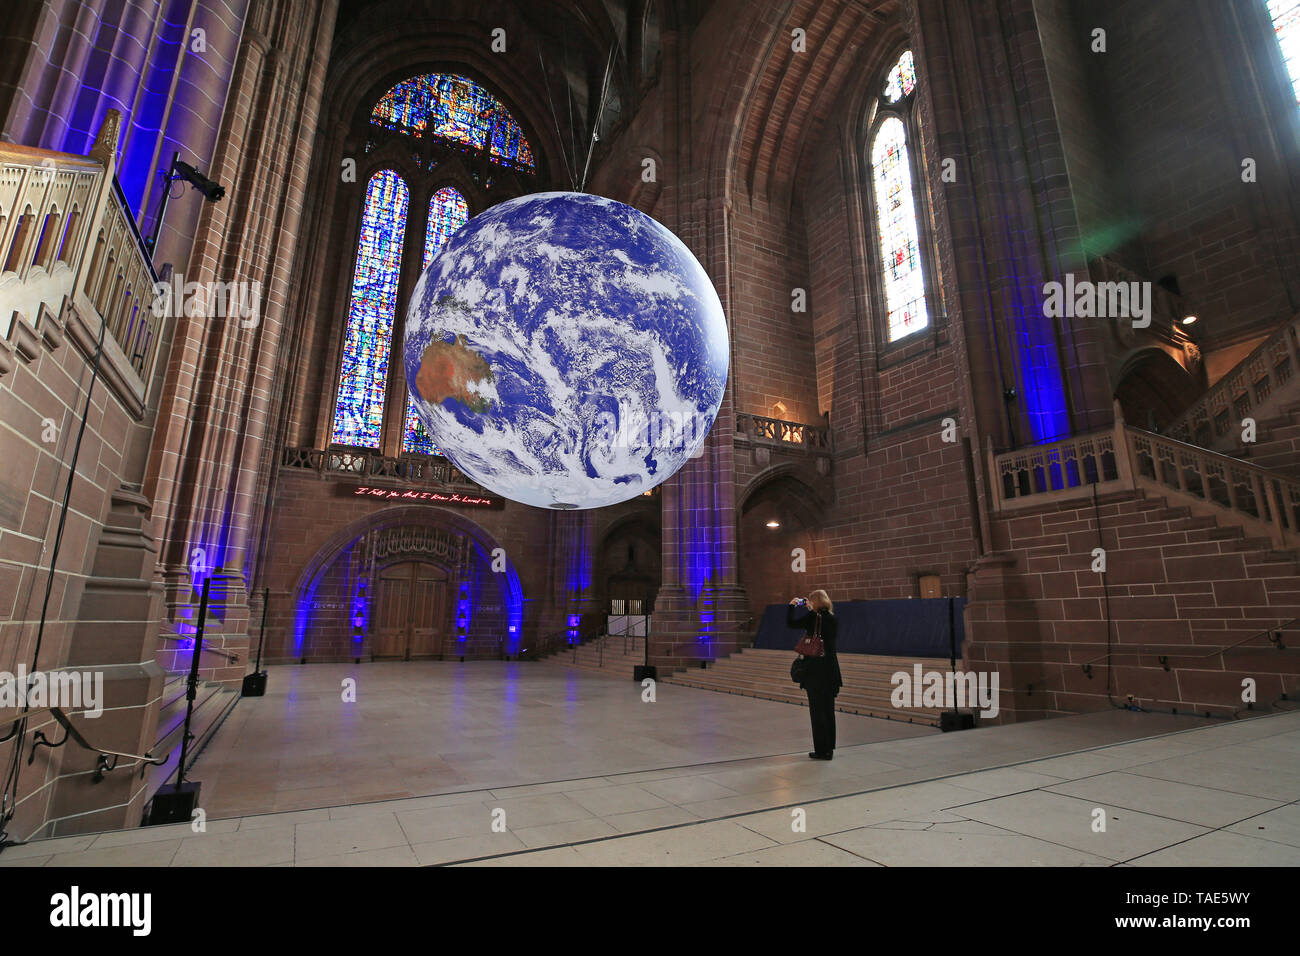 Gaia, a 23ft replica of planet earth hangs on display inside Liverpool Cathedral ahead of the city's River festival. The large installation, created by British artist Luke Jerram, features accurate and detailed imagery from NASA and is on display for the first time anywhere in the world. Stock Photo